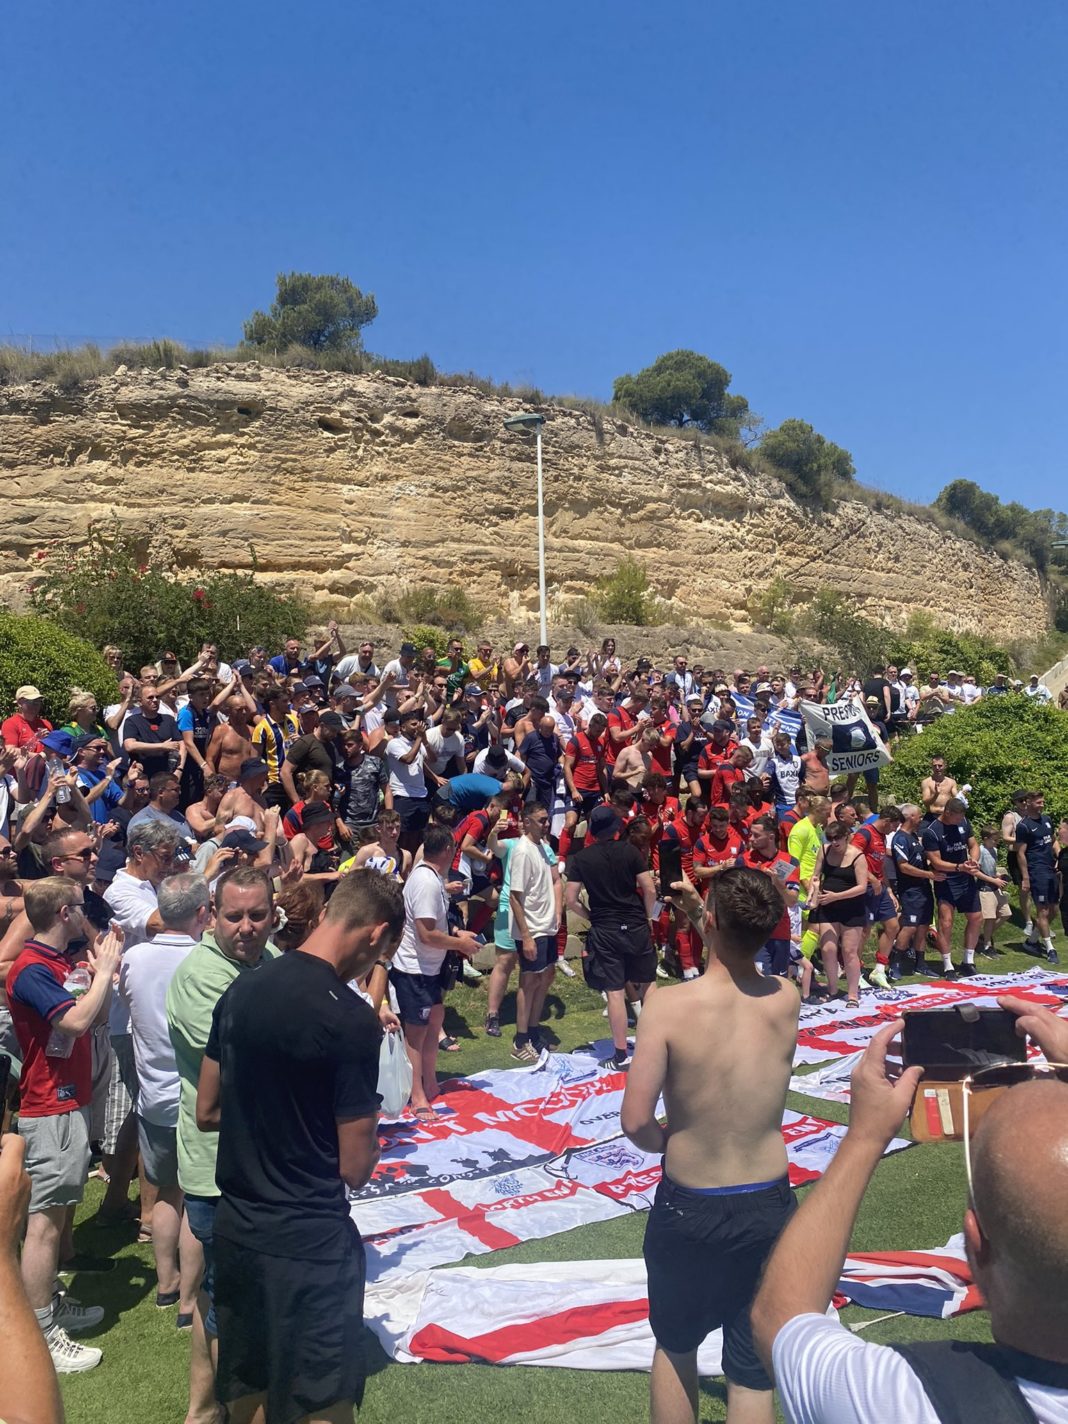 500 PNE fans at Campoamor in Getafe friendly as temperatures hit 34 degrees!